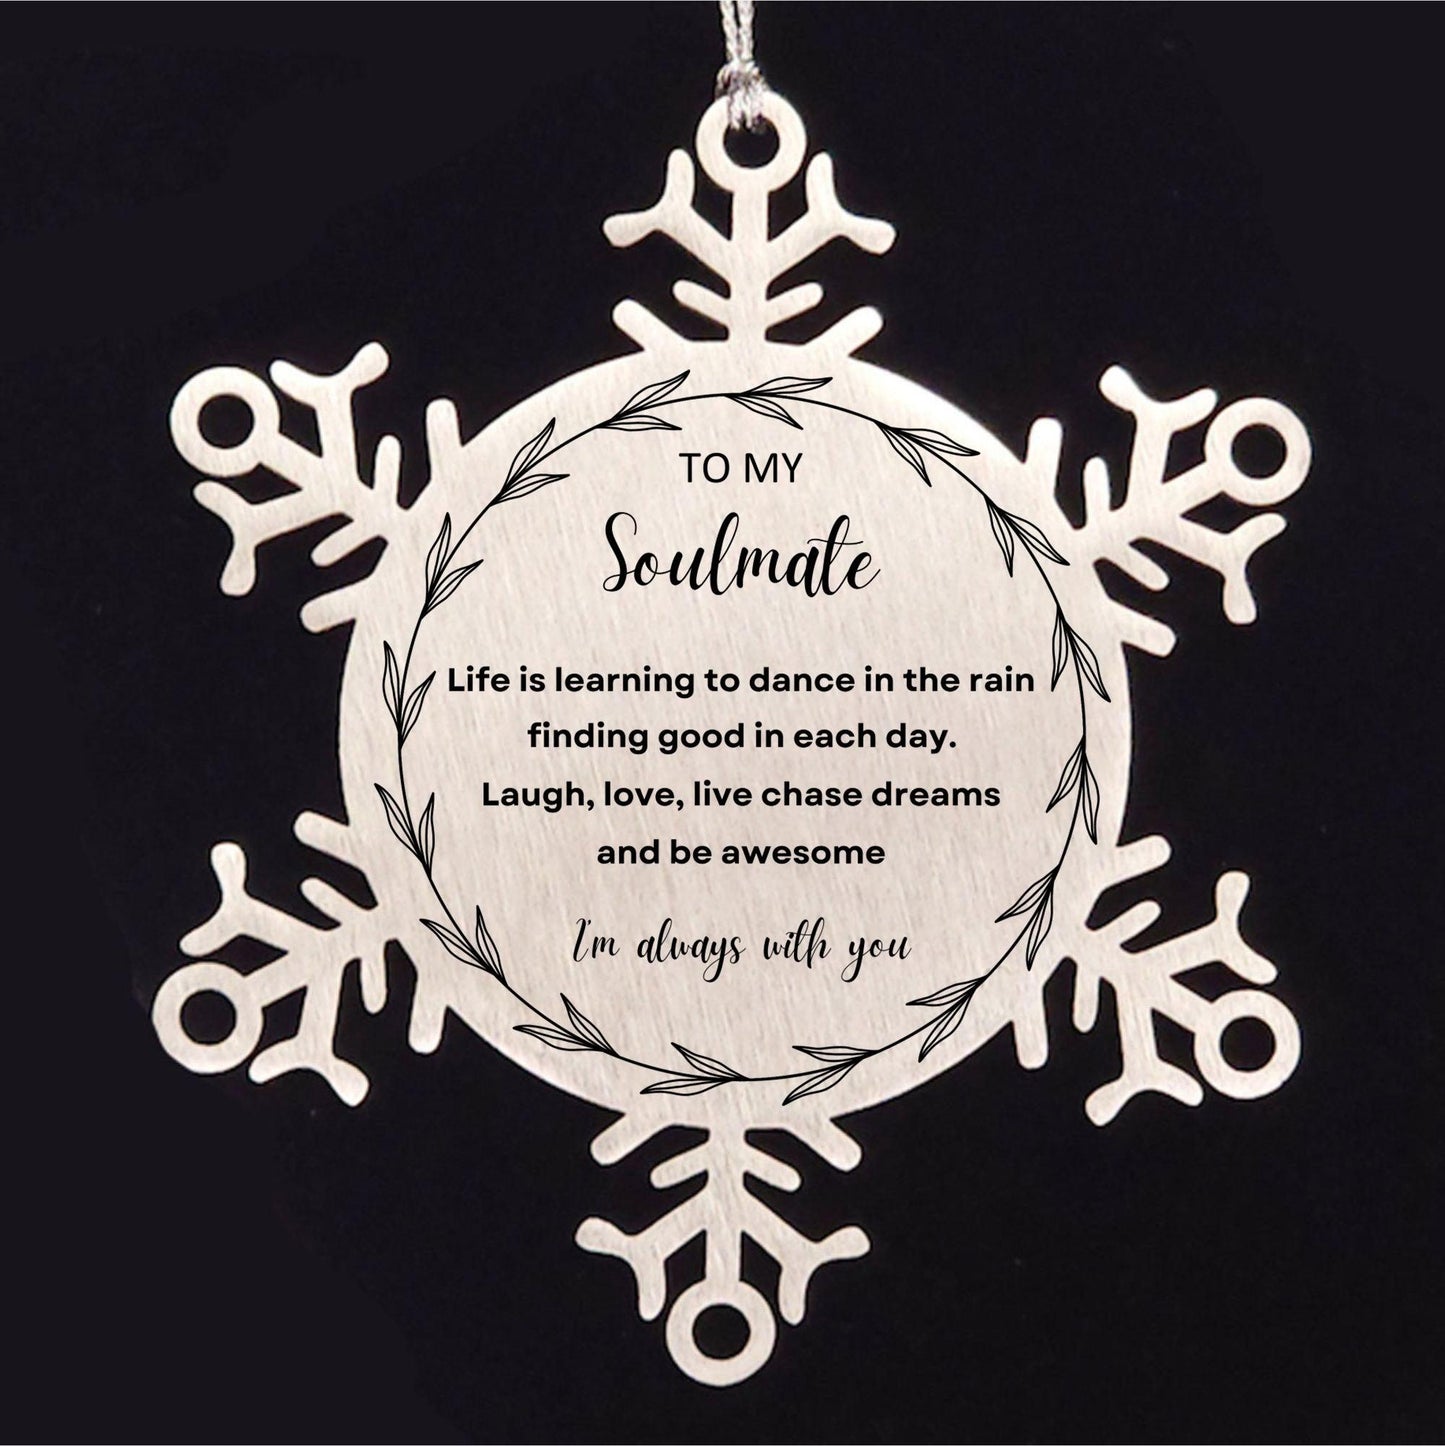 Heartfelt Soulmate Snowflake Engraved Ornament - Life is Learning to Dance in the Rain, I'm always with you - Birthday, Christmas Holiday Gifts - Mallard Moon Gift Shop